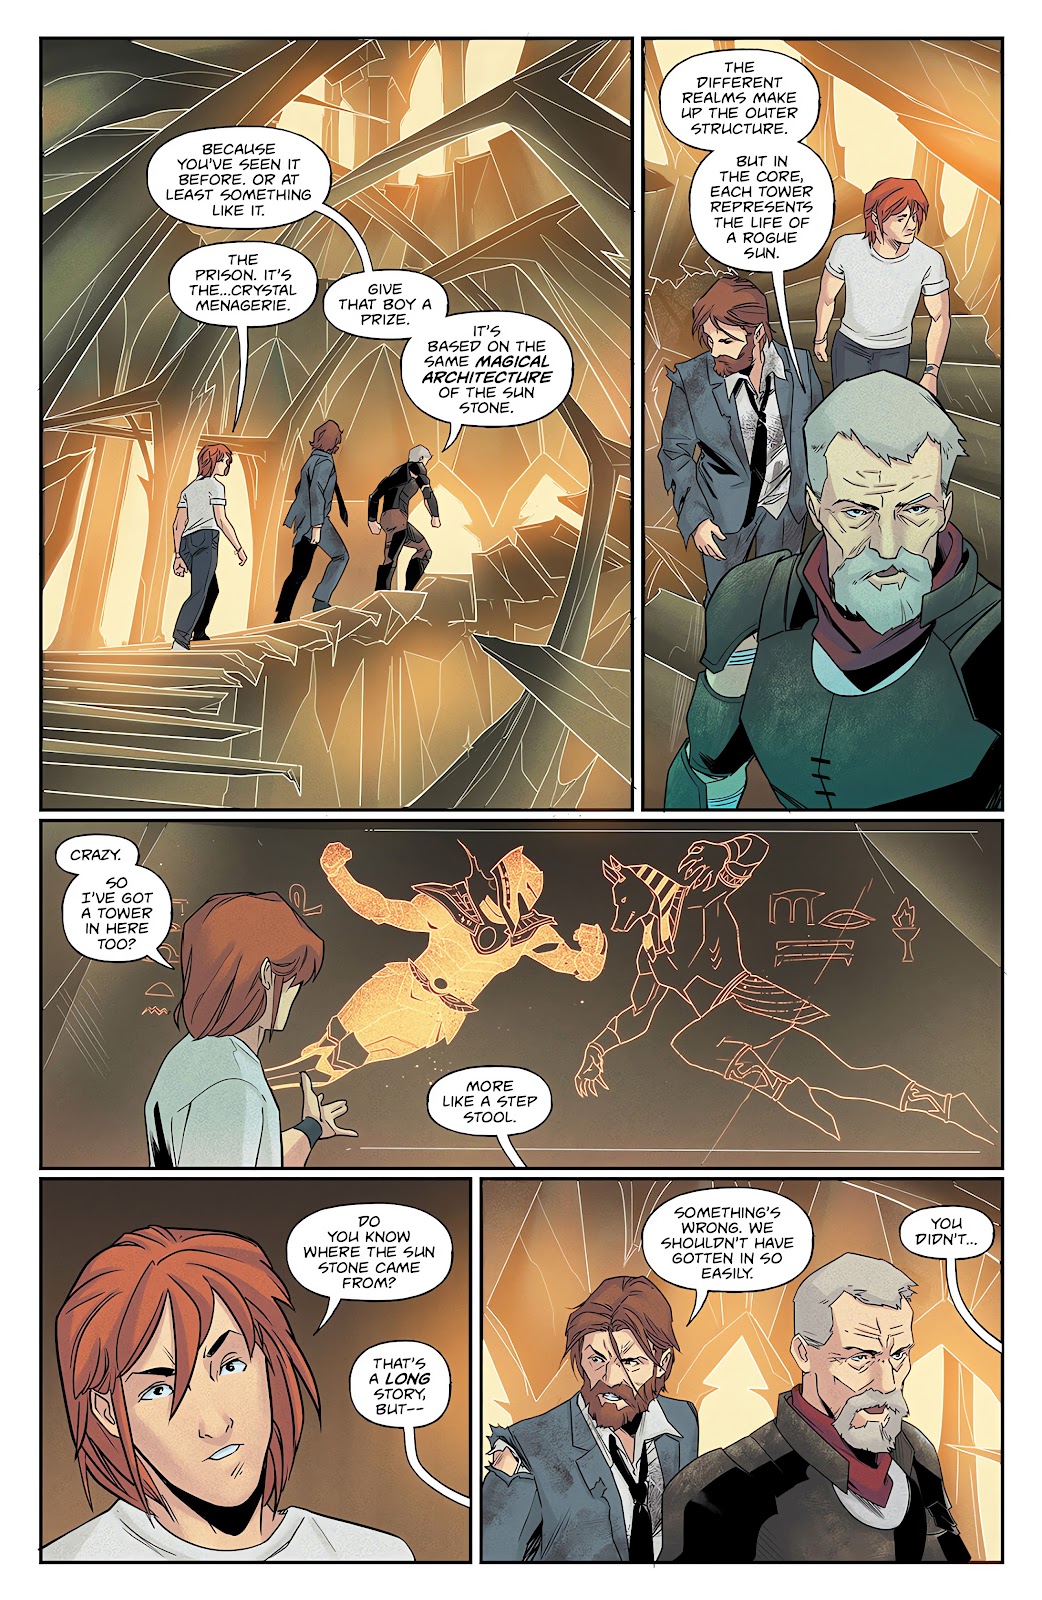 Rogue Sun issue 15 - Page 16